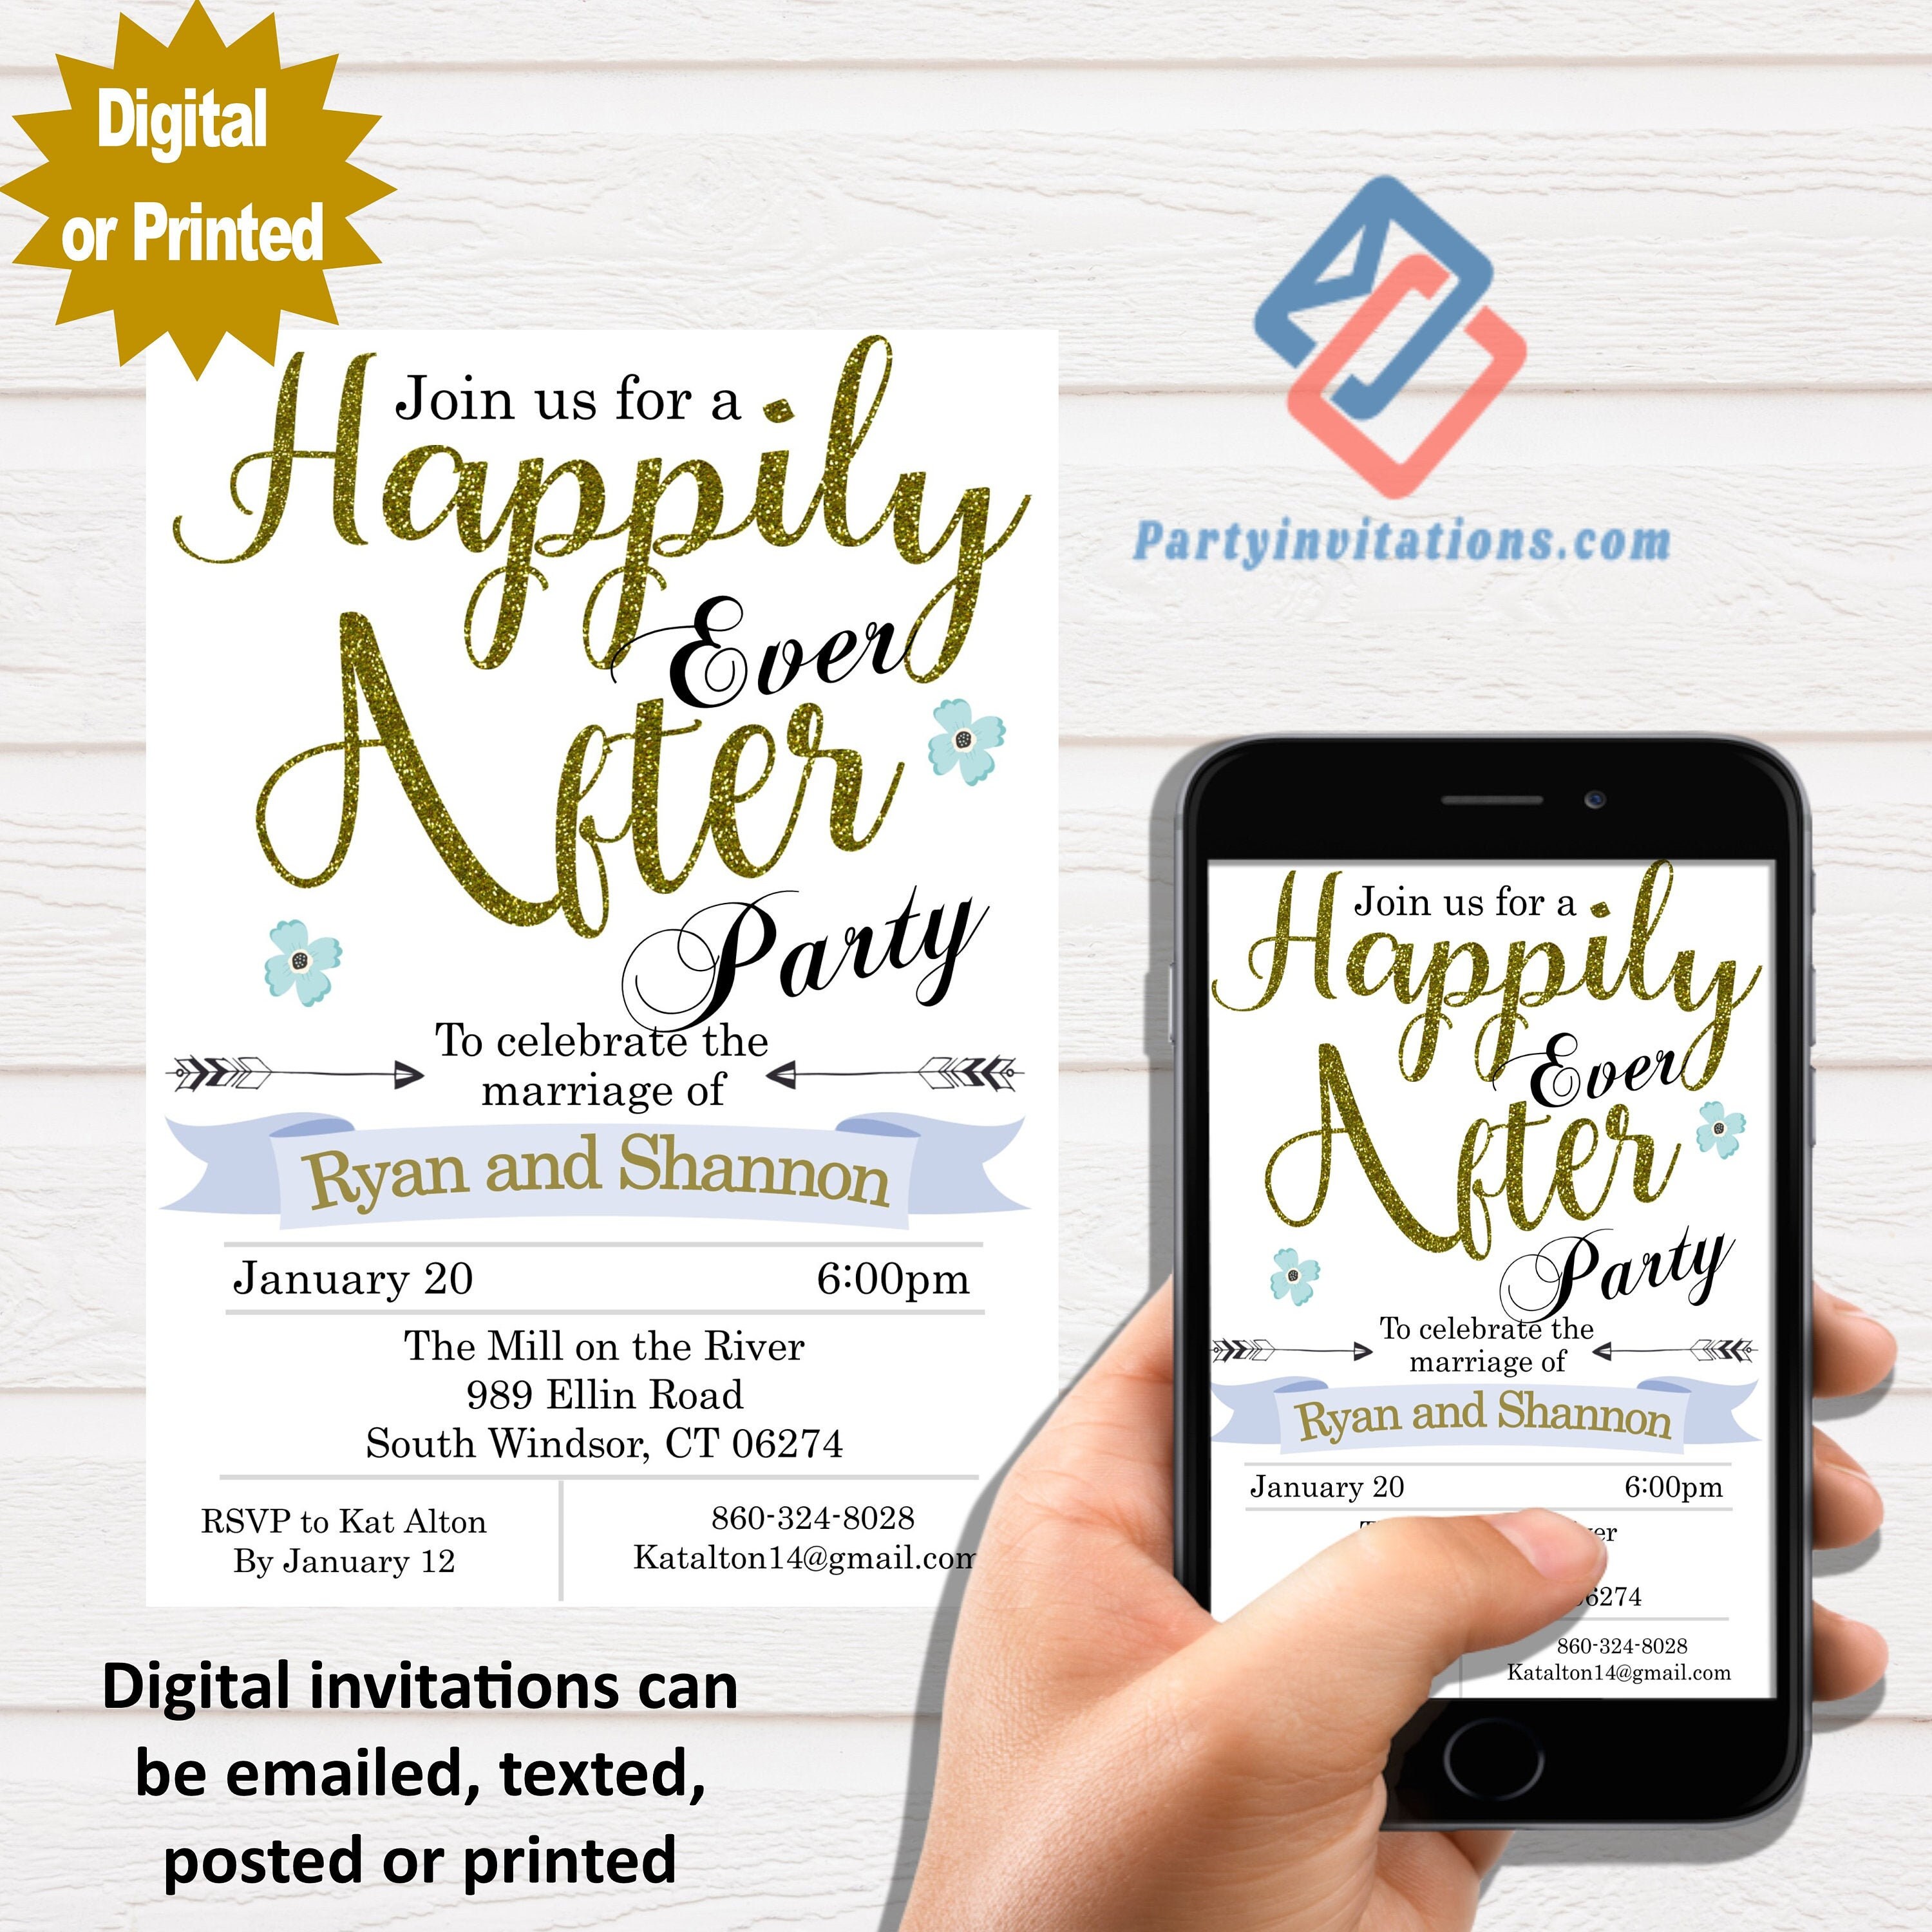 Happily Ever After Party Wedding Invitations - jule-freedom